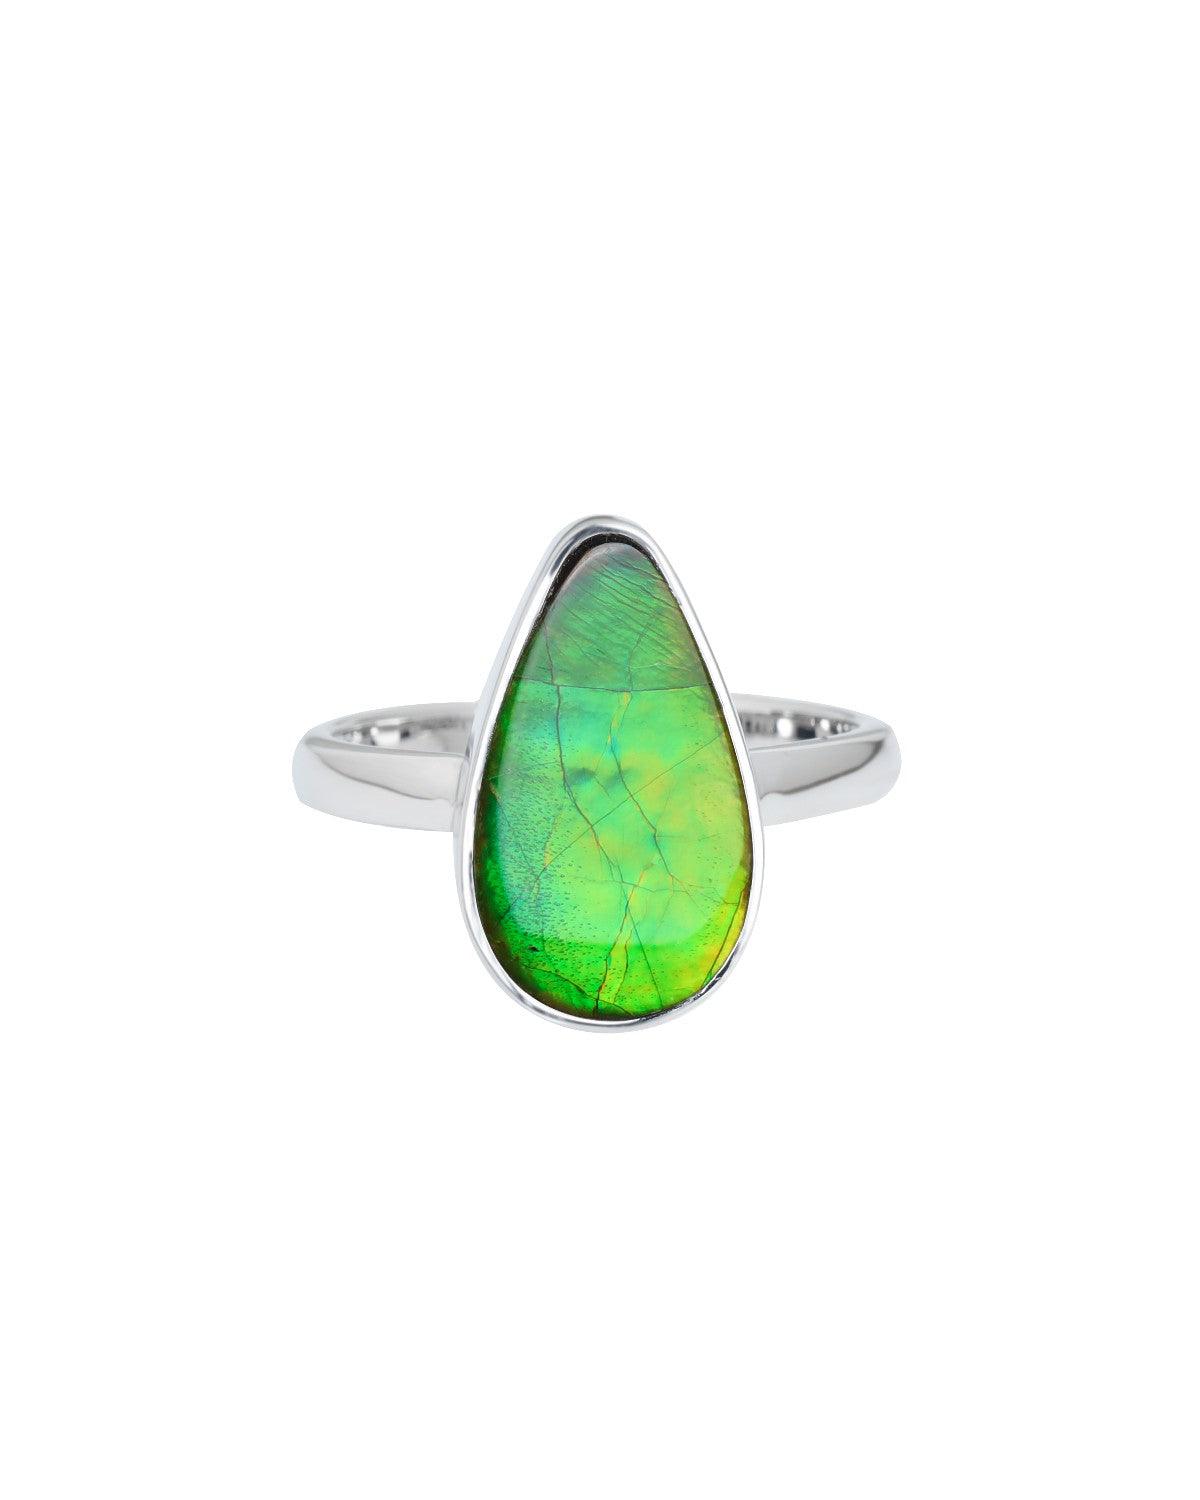 6.05 Ct. Ammolite Ring Solid 925 Sterling Silver Jewelry - YoTreasure